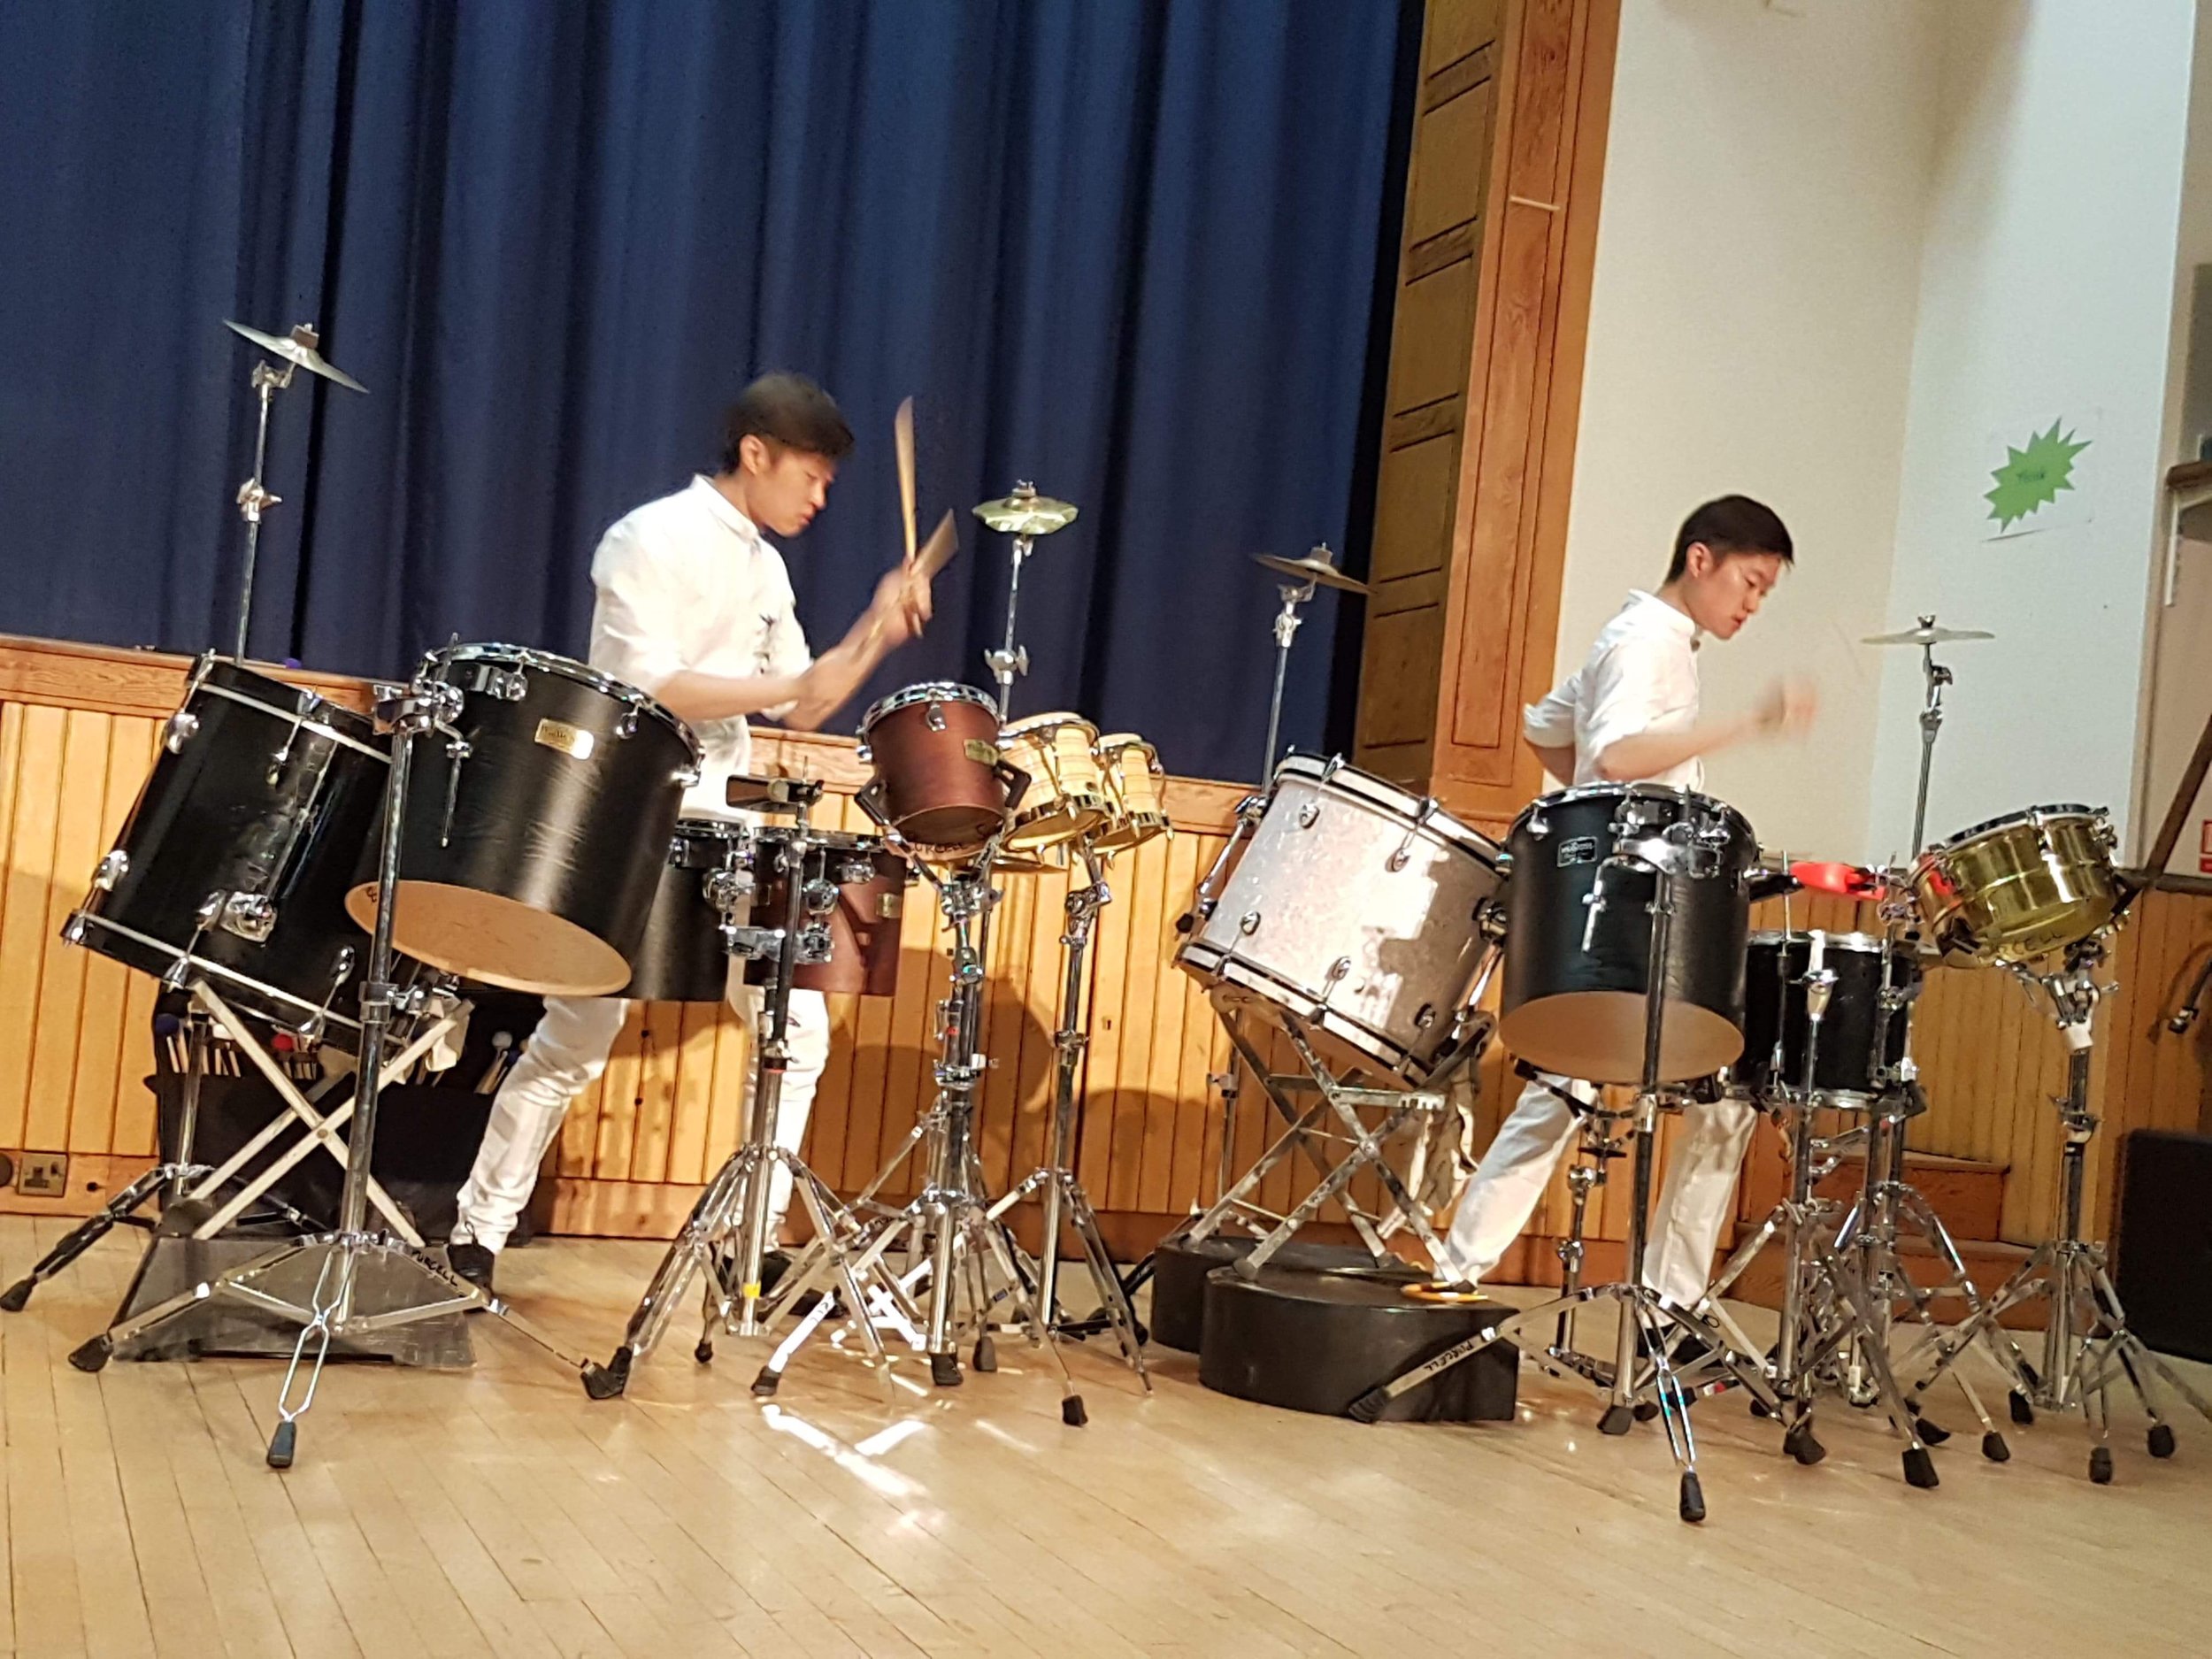 Opening concert at Southern percussion youth competition